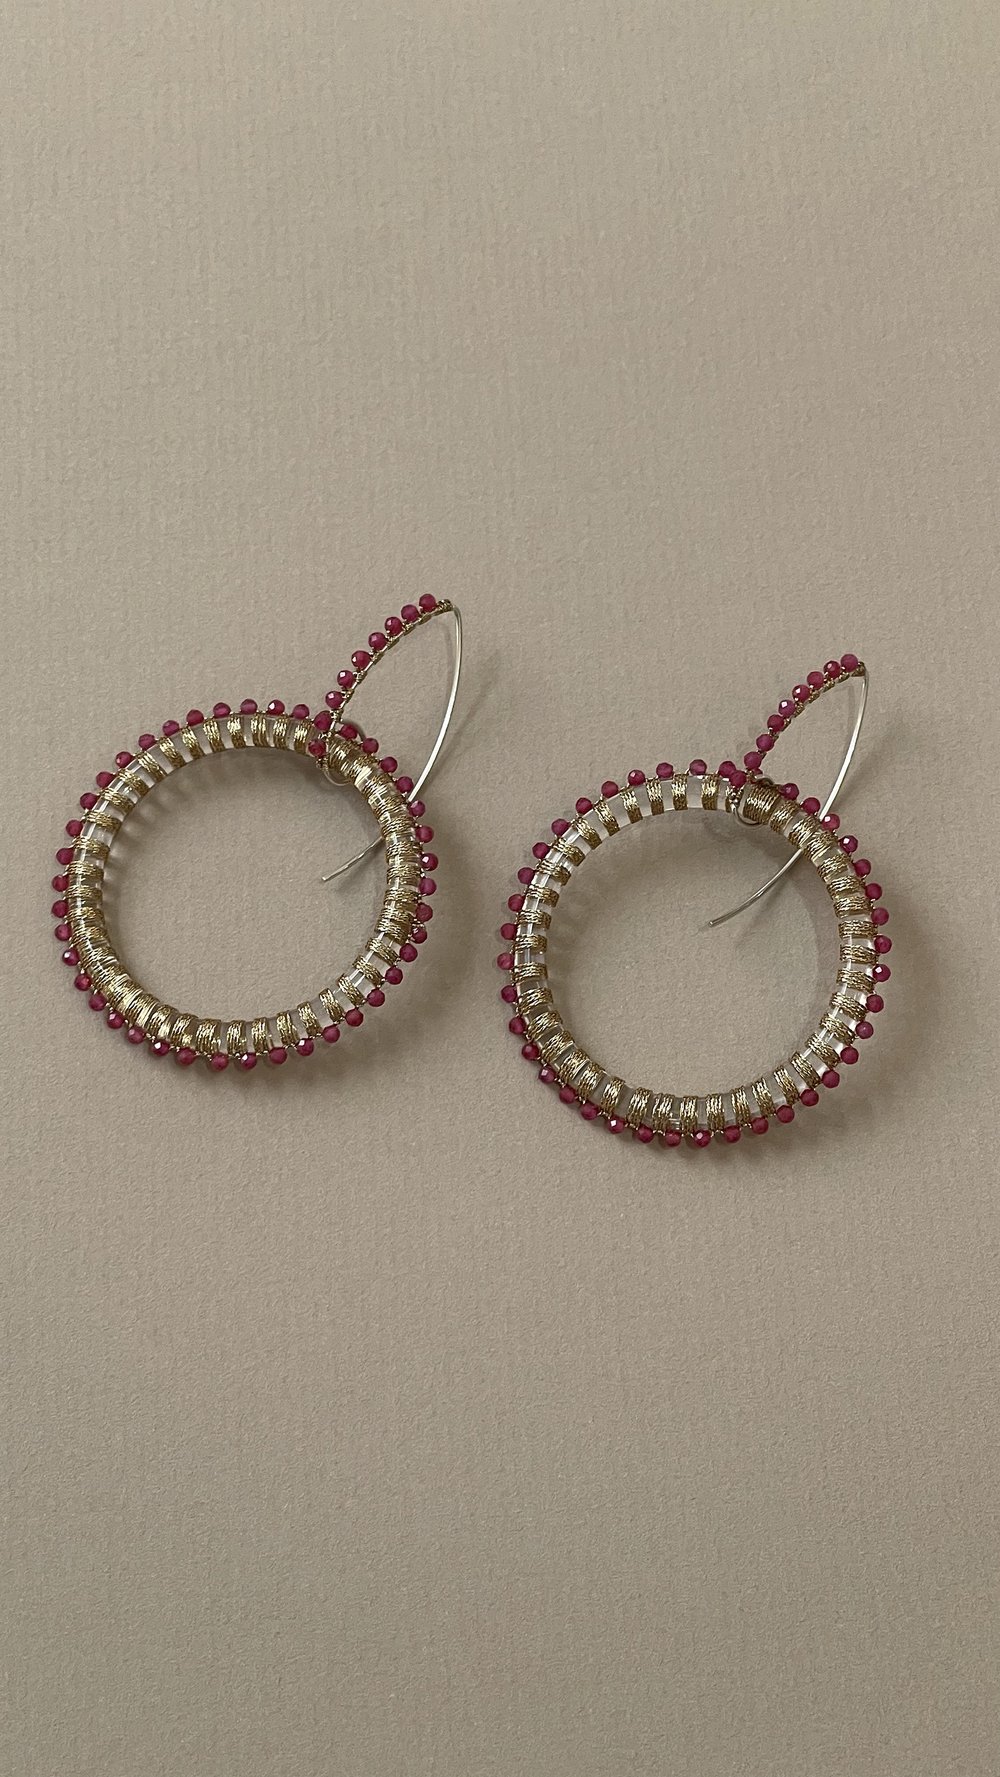 AQE112 LARGE STERLING SILVER HAND WOVEN SHINY SILVER HOOPS. AVAILABLE IN  75MM, 60MM, 50MM, AND 40MM SIZES — SIMON ALCANTARA LLC